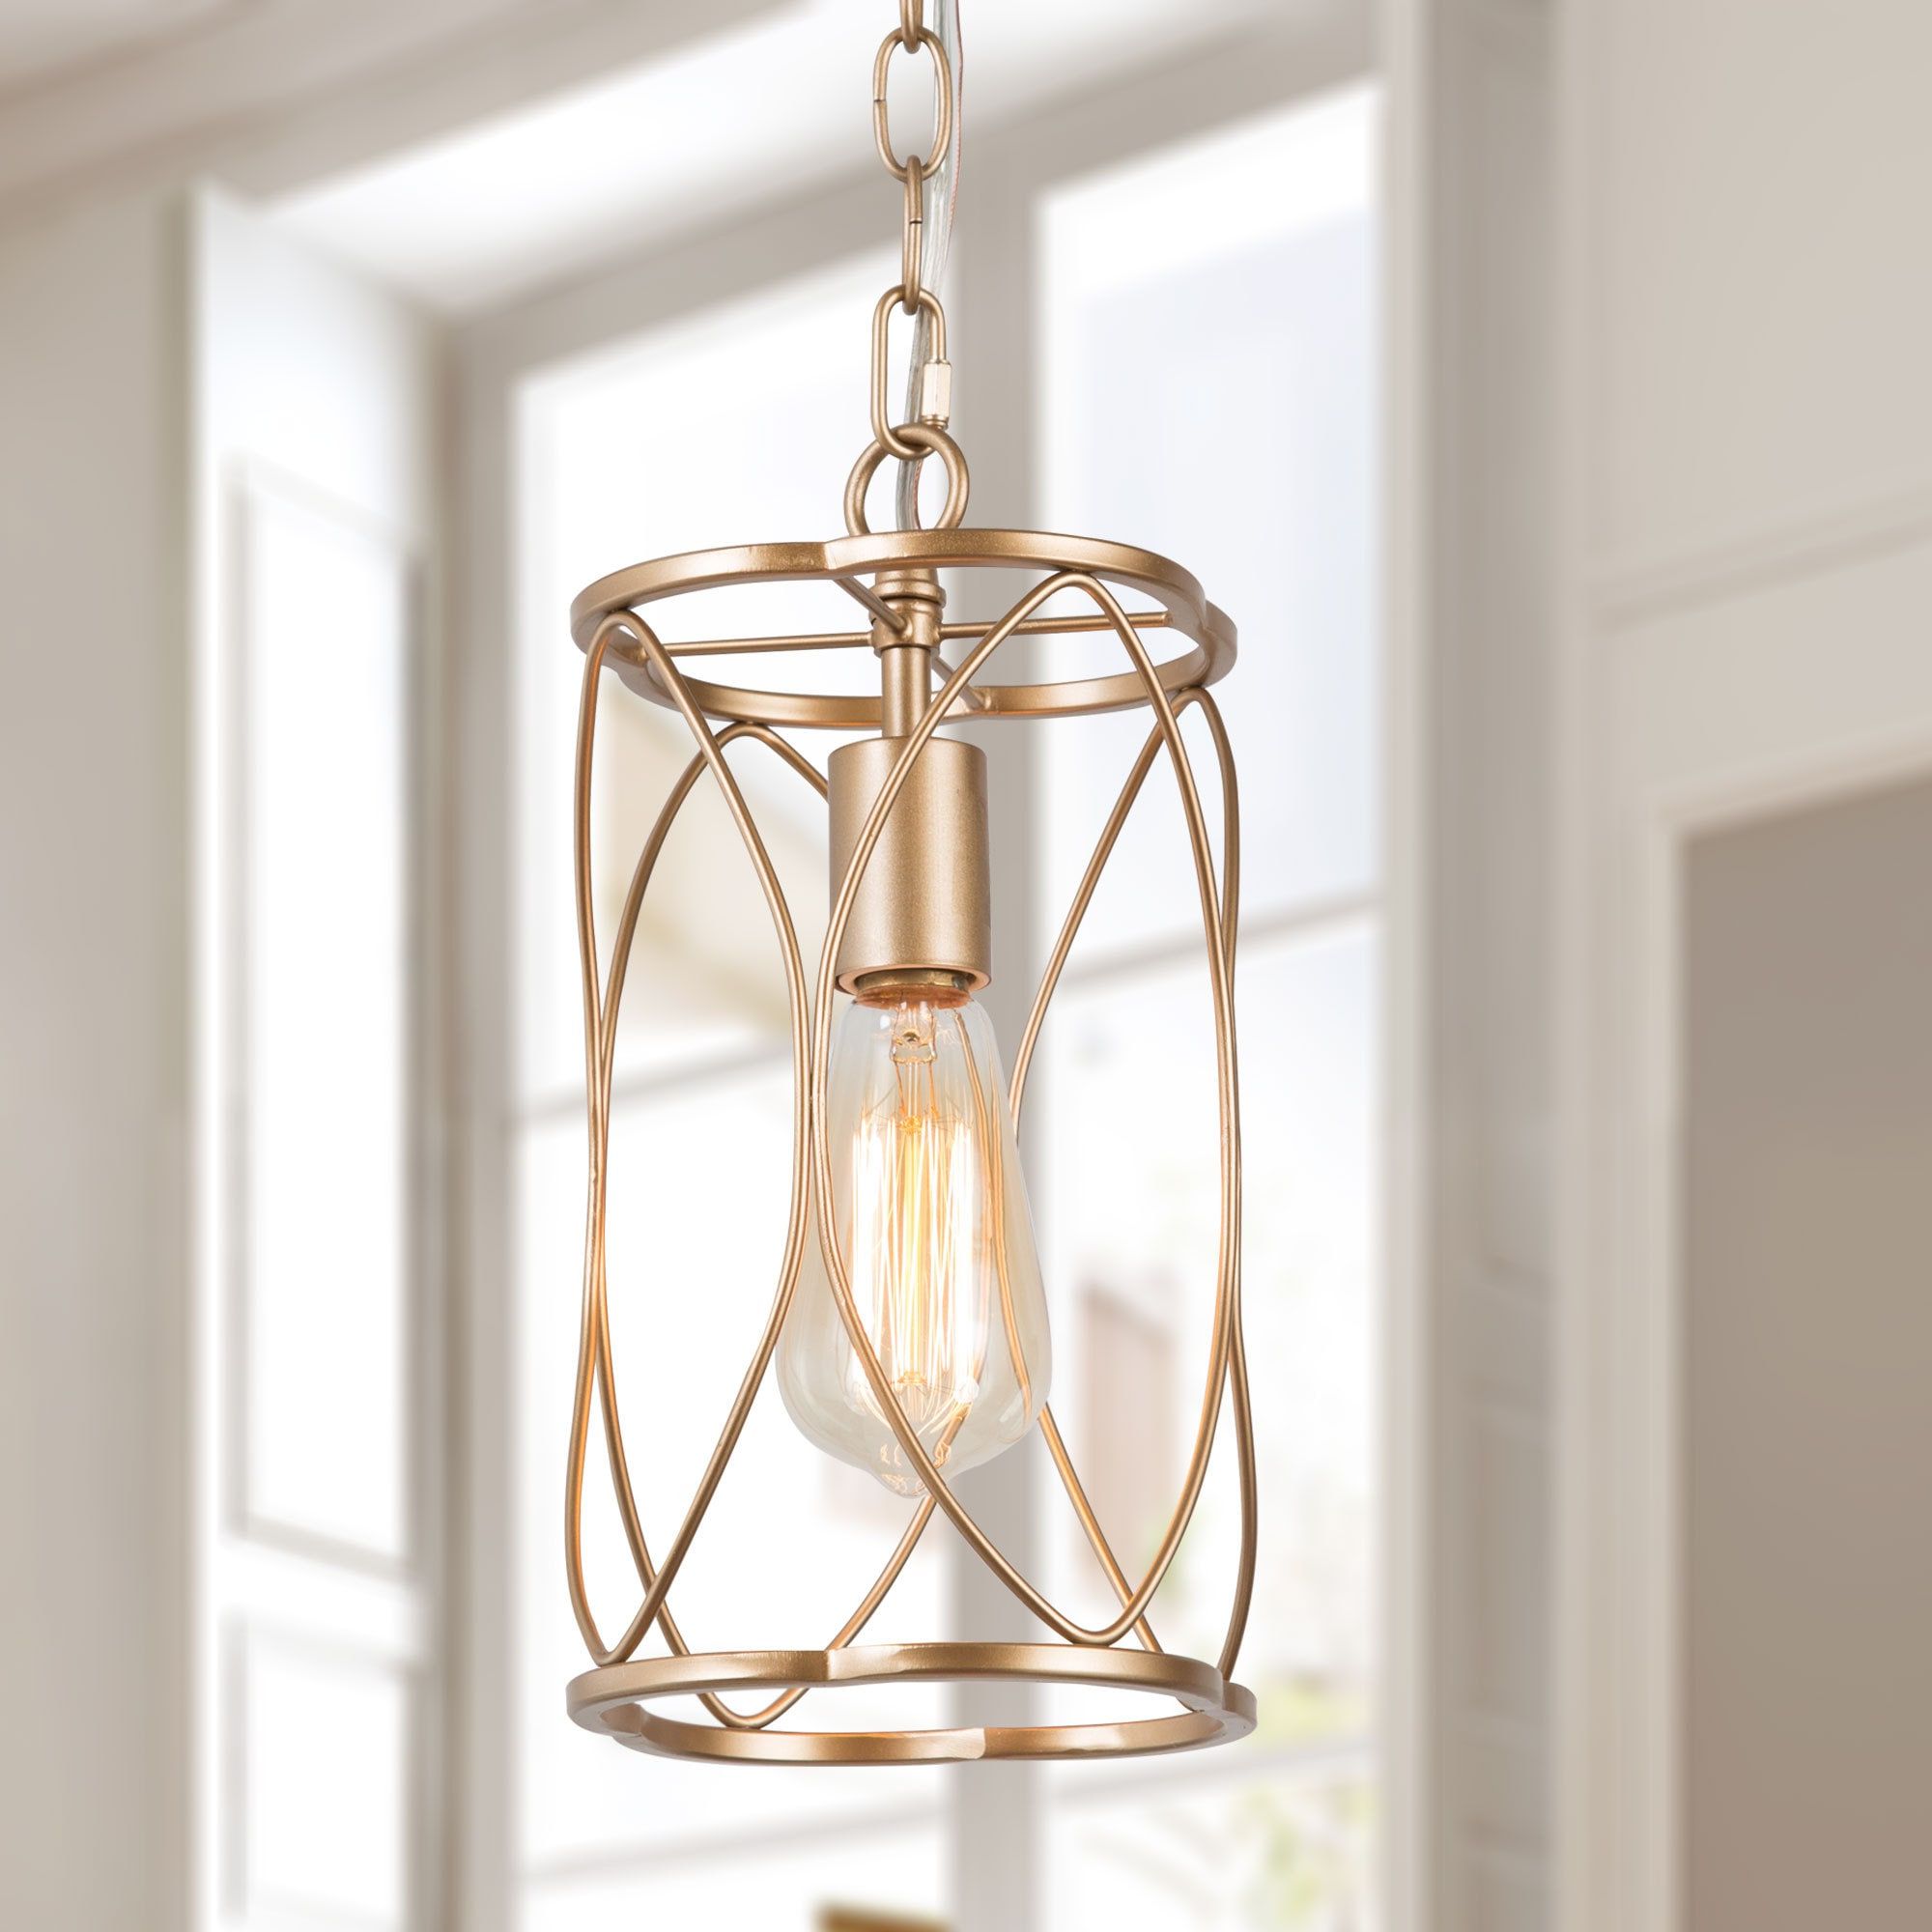 Preferred Lnc Trend Matte Champagne Gold Modern/contemporary Lantern Led Mini Pendant  Light At Lowes Intended For Brushed Champagne Lantern Chandeliers (View 4 of 15)